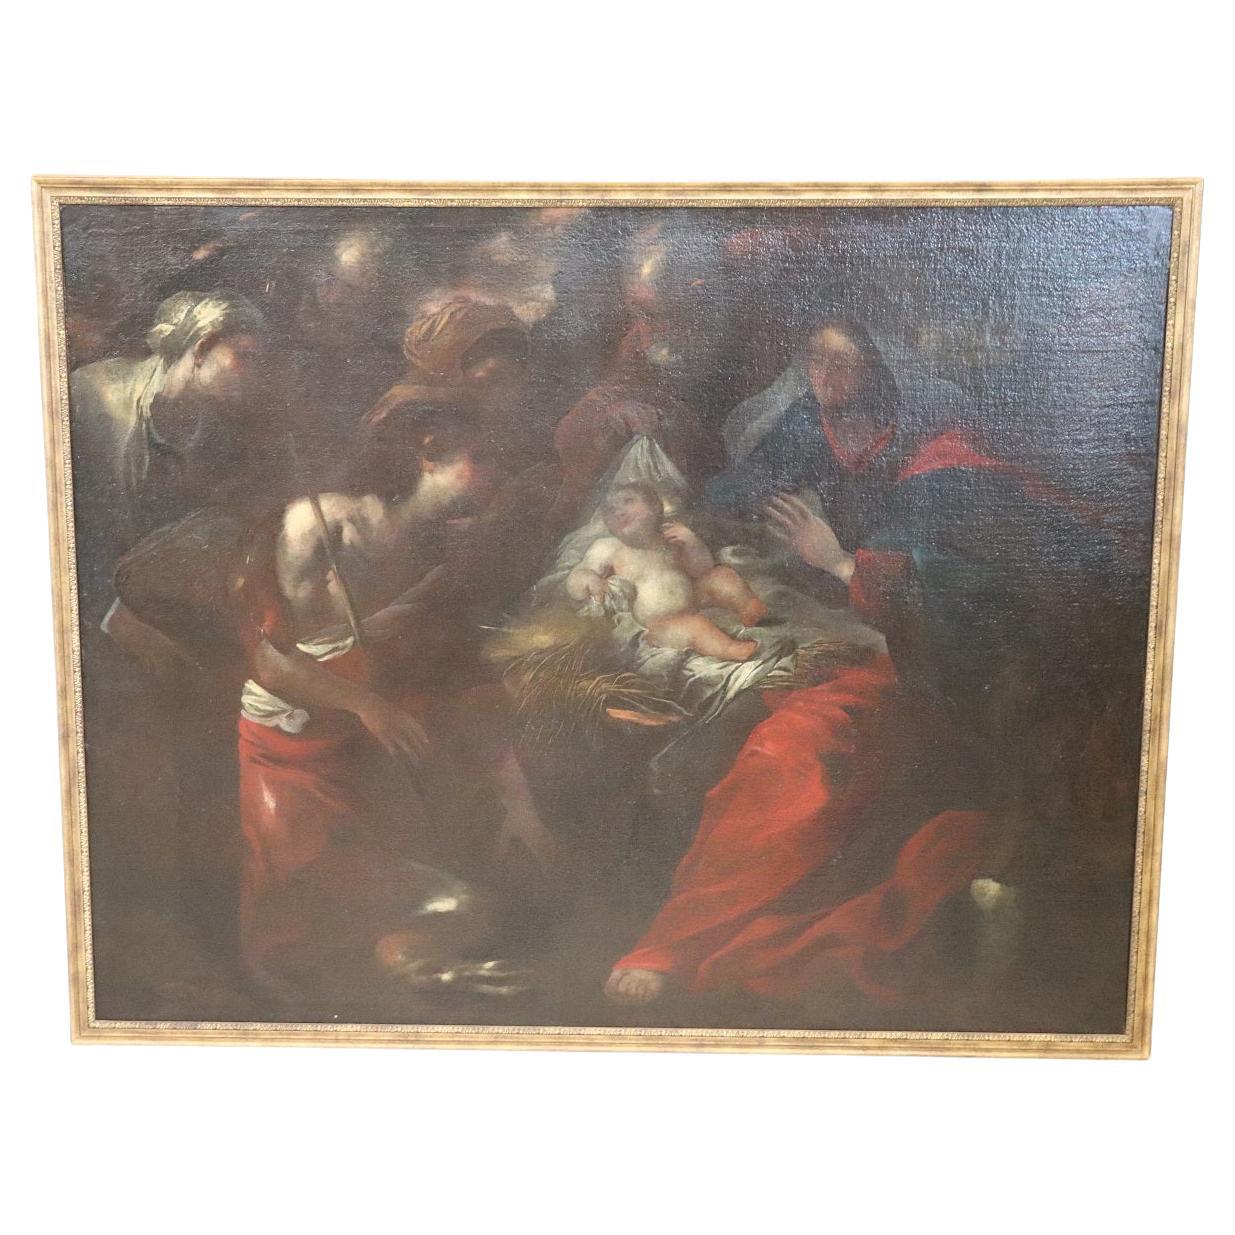 17th Century Large Antique Oil Painting on Canvas Religious Subject "Nativity"